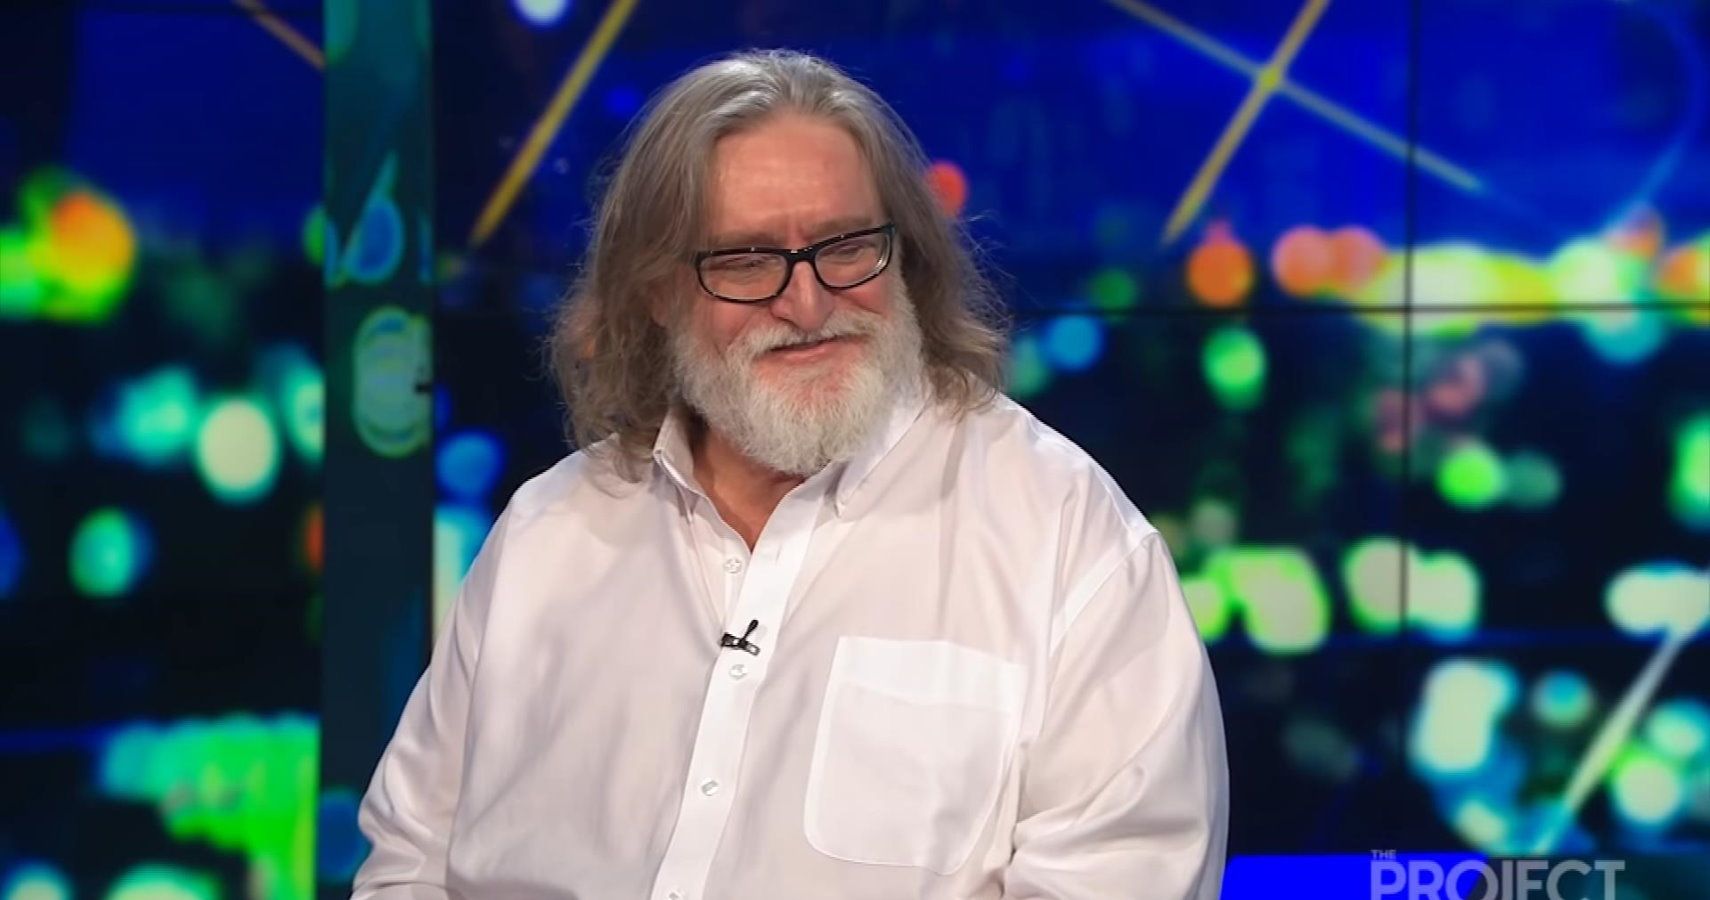 Gabe Newell Has Been Stuck in New Zealand Since COVID-19 Pandemic Began